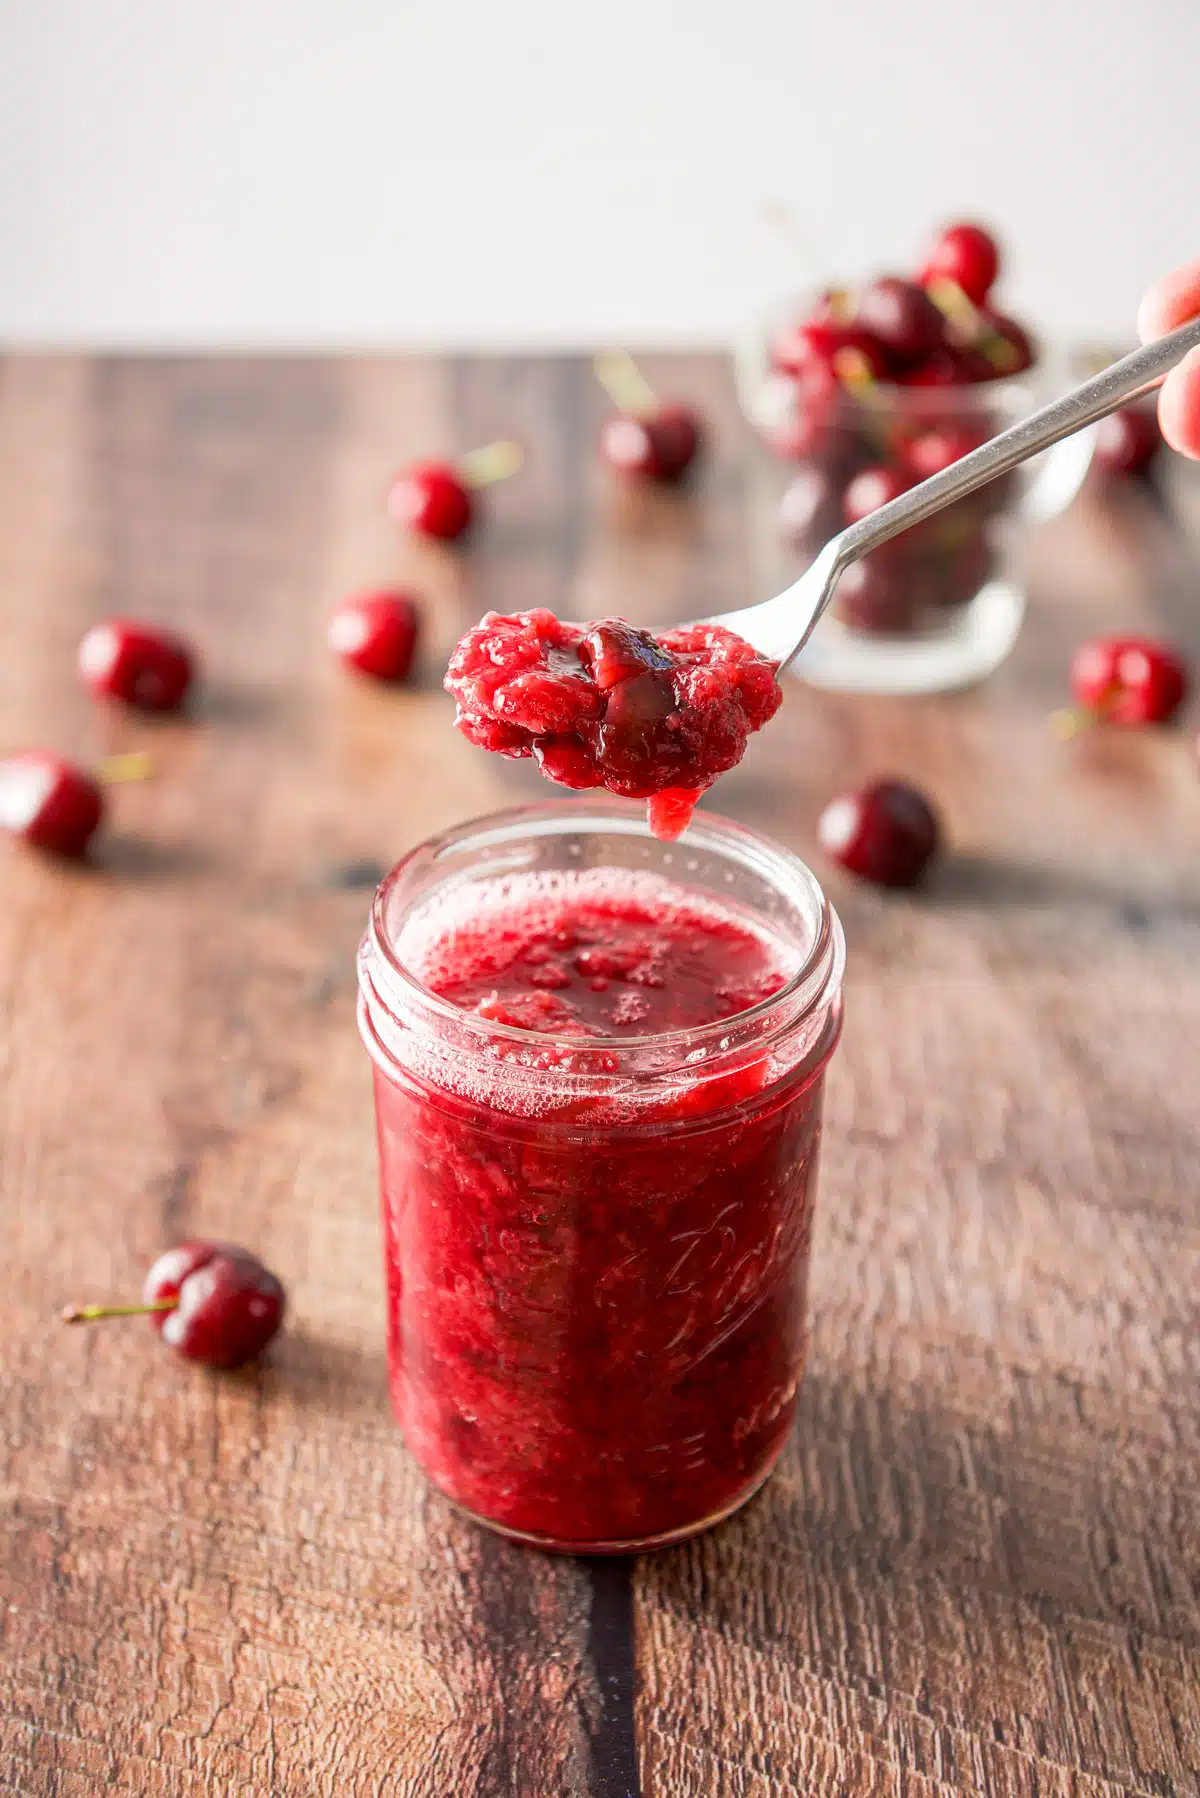 A spoonful of sauce held over a jar filled with it along with cherries in a glass and on the table